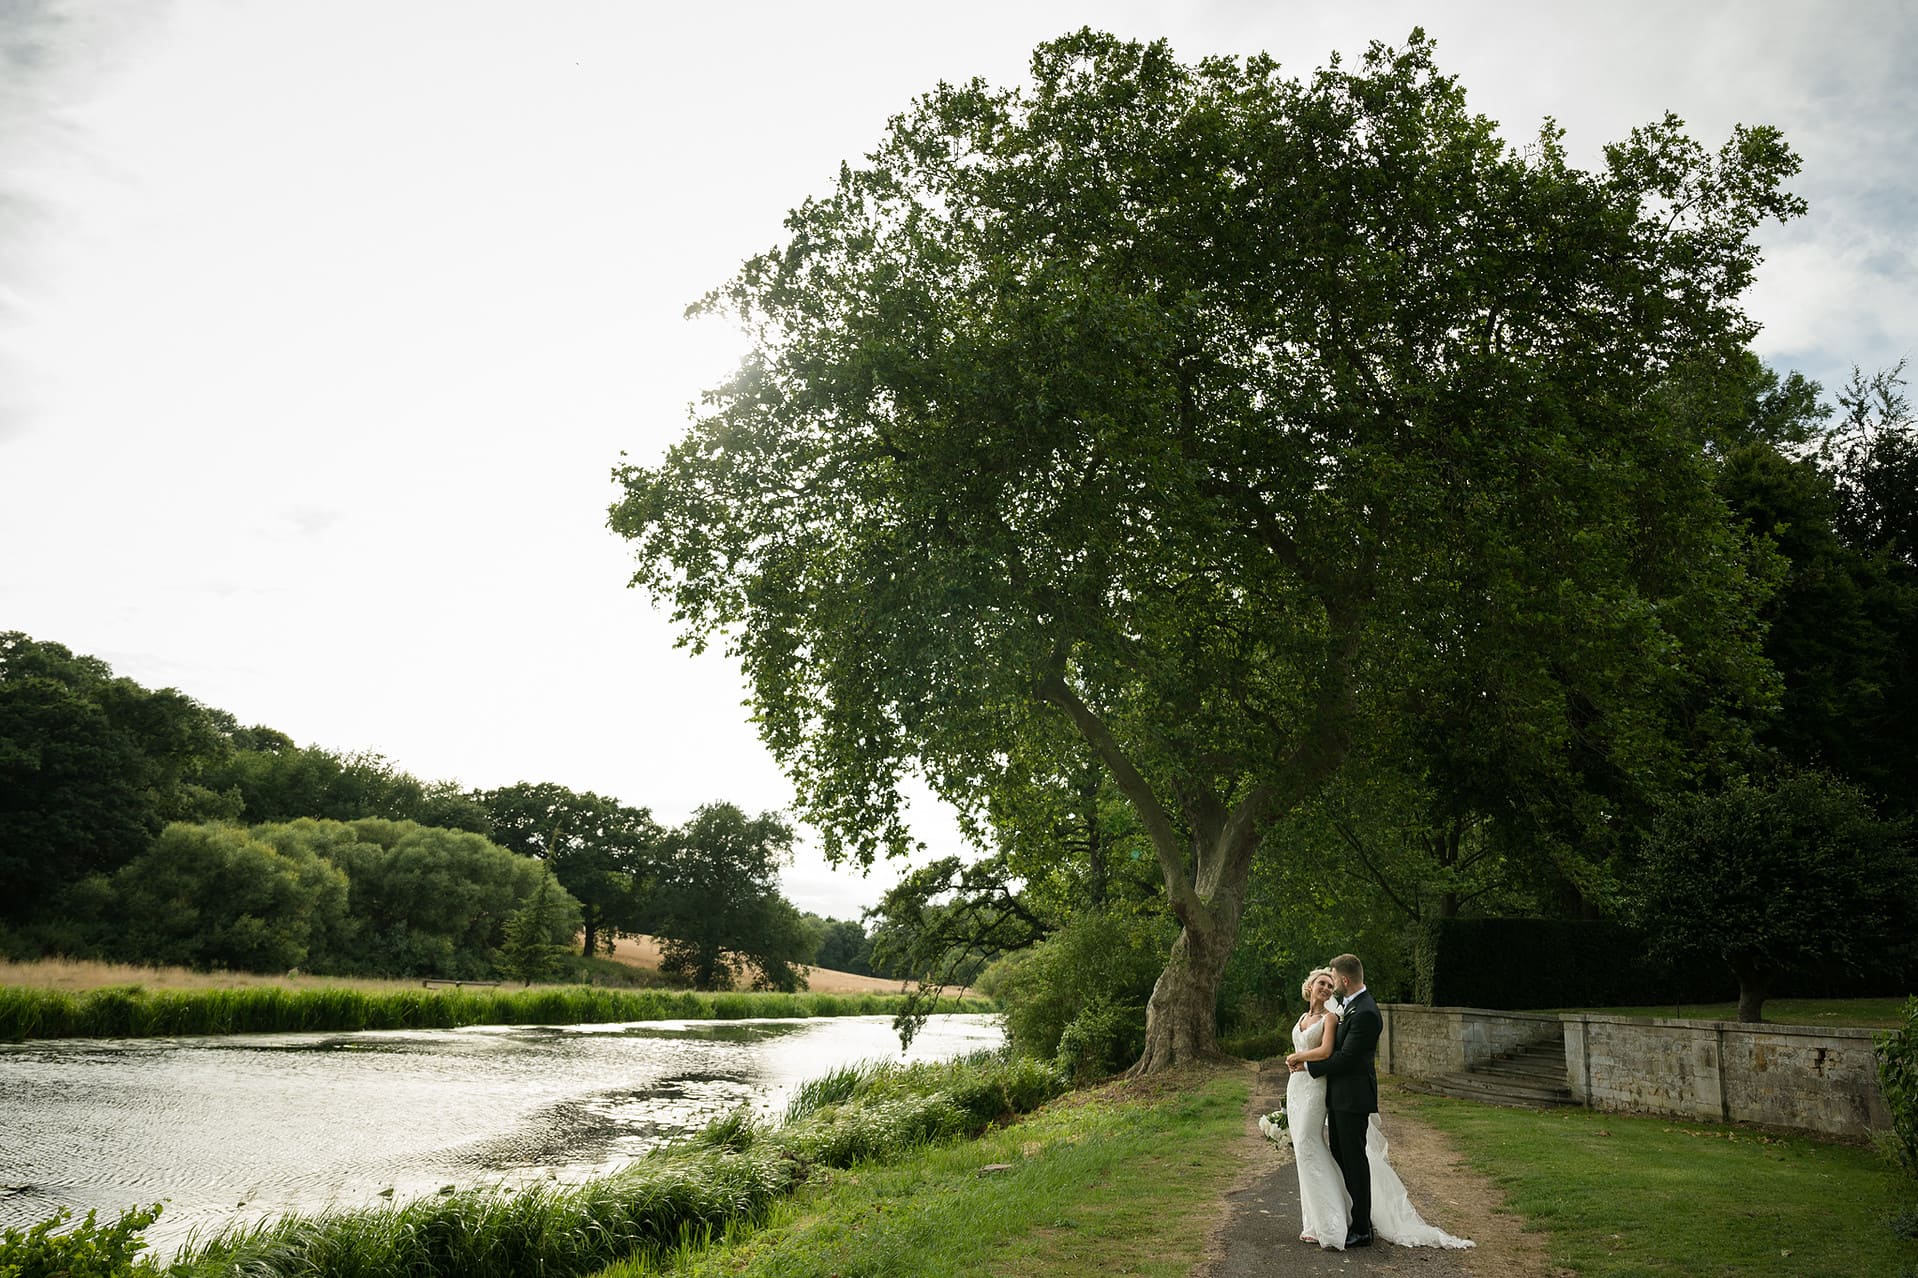 Bride and groom standing together in front of a large tree by a lake